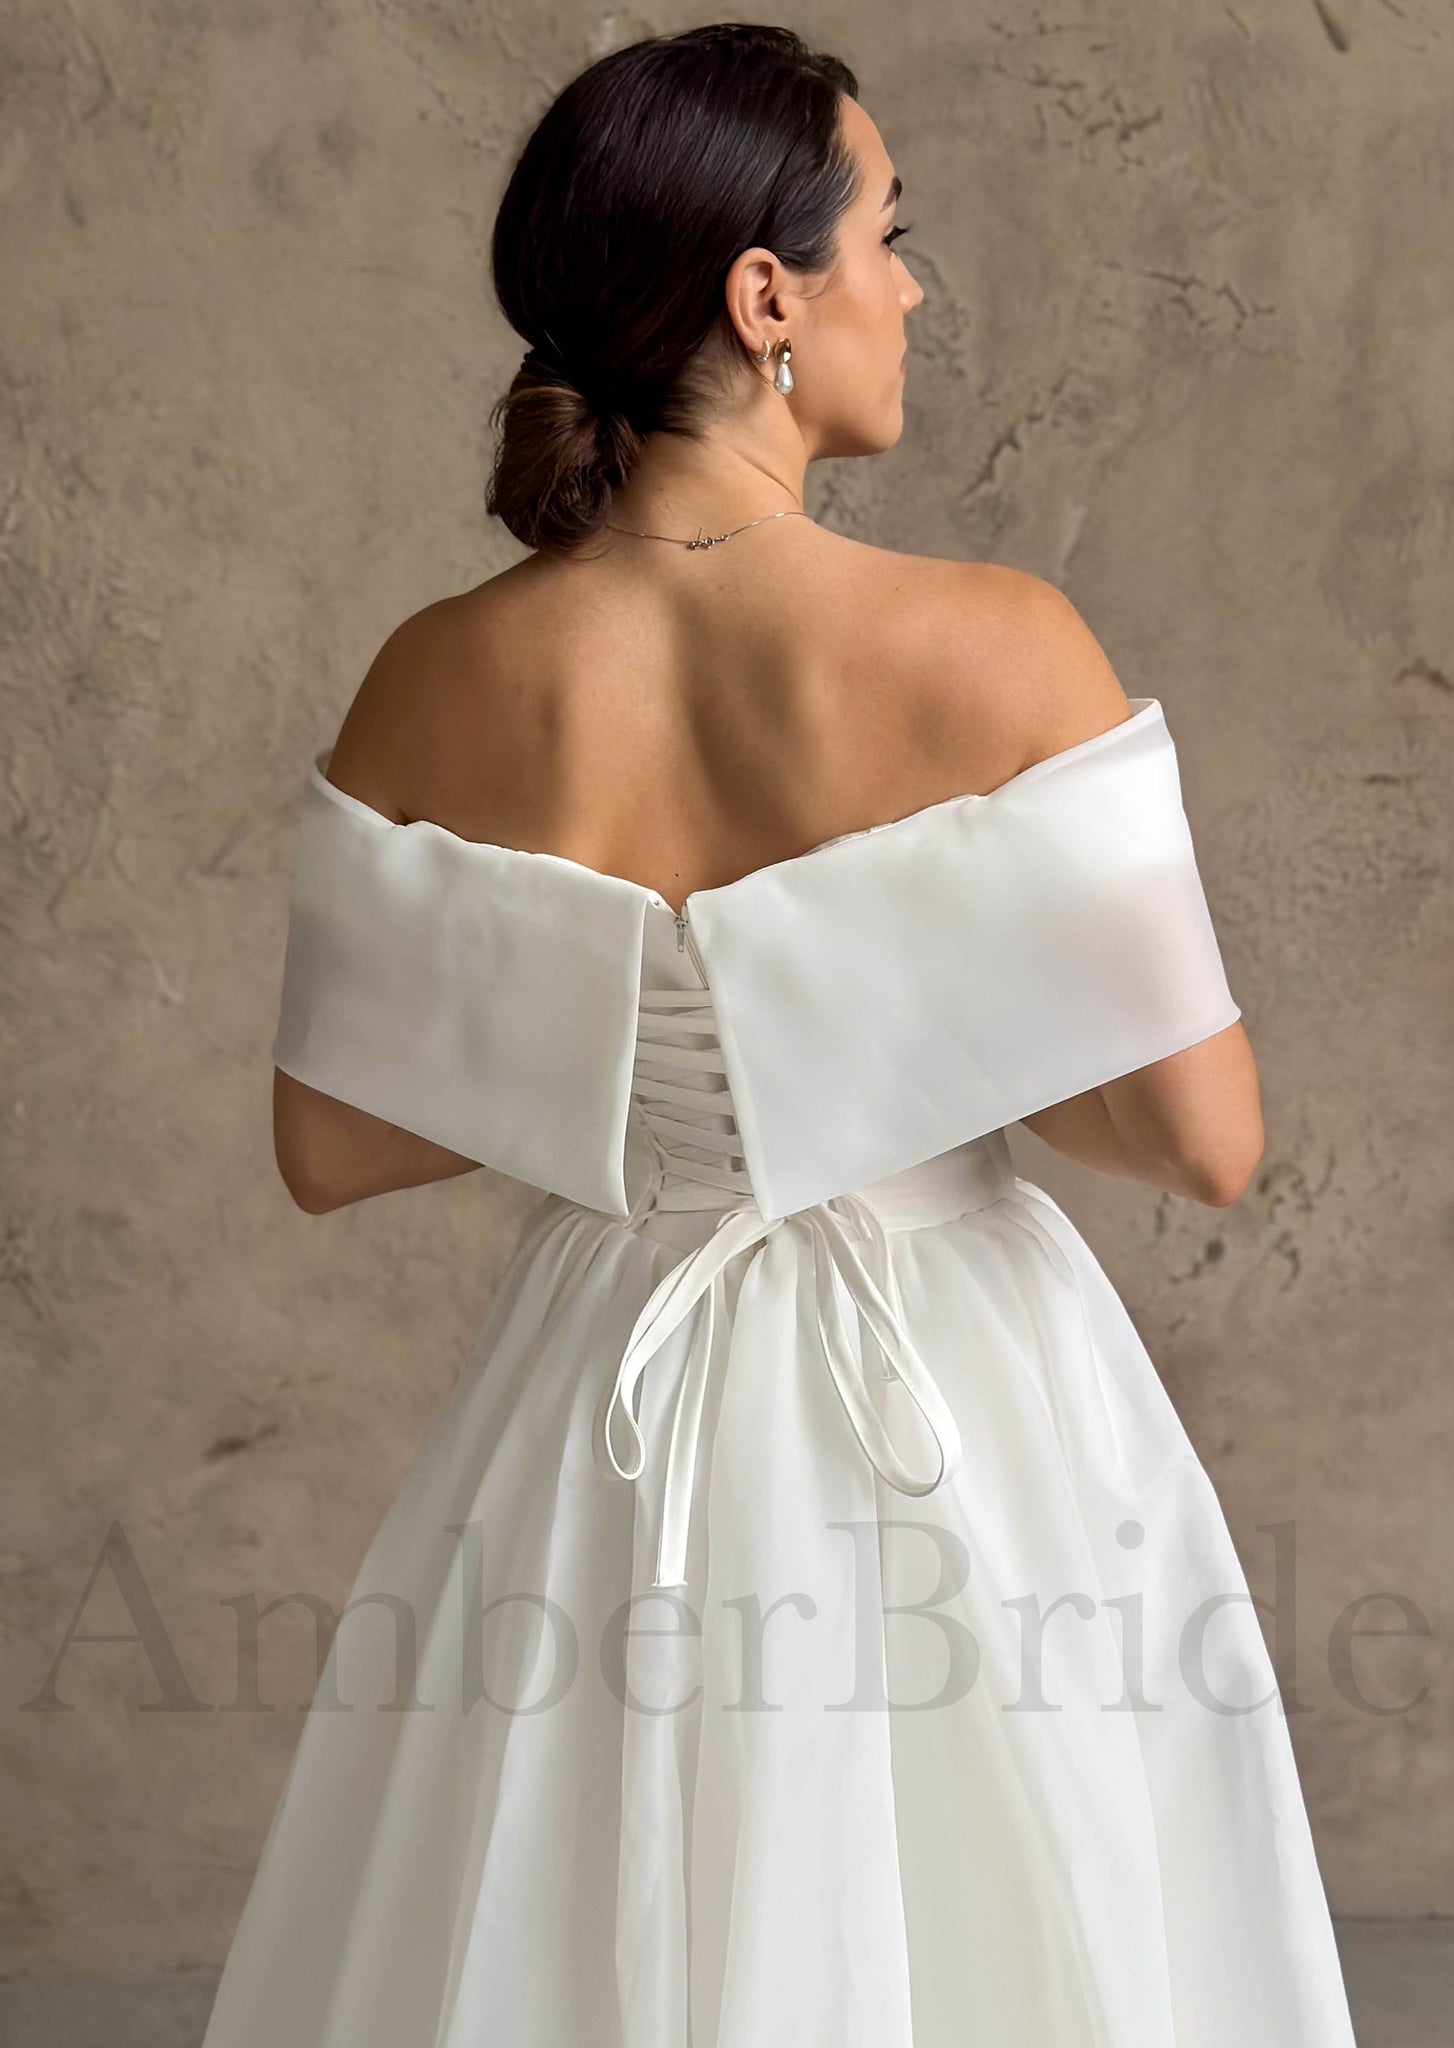 Simple A Line Off The Shoulder Organza Wedding Dress with Corset